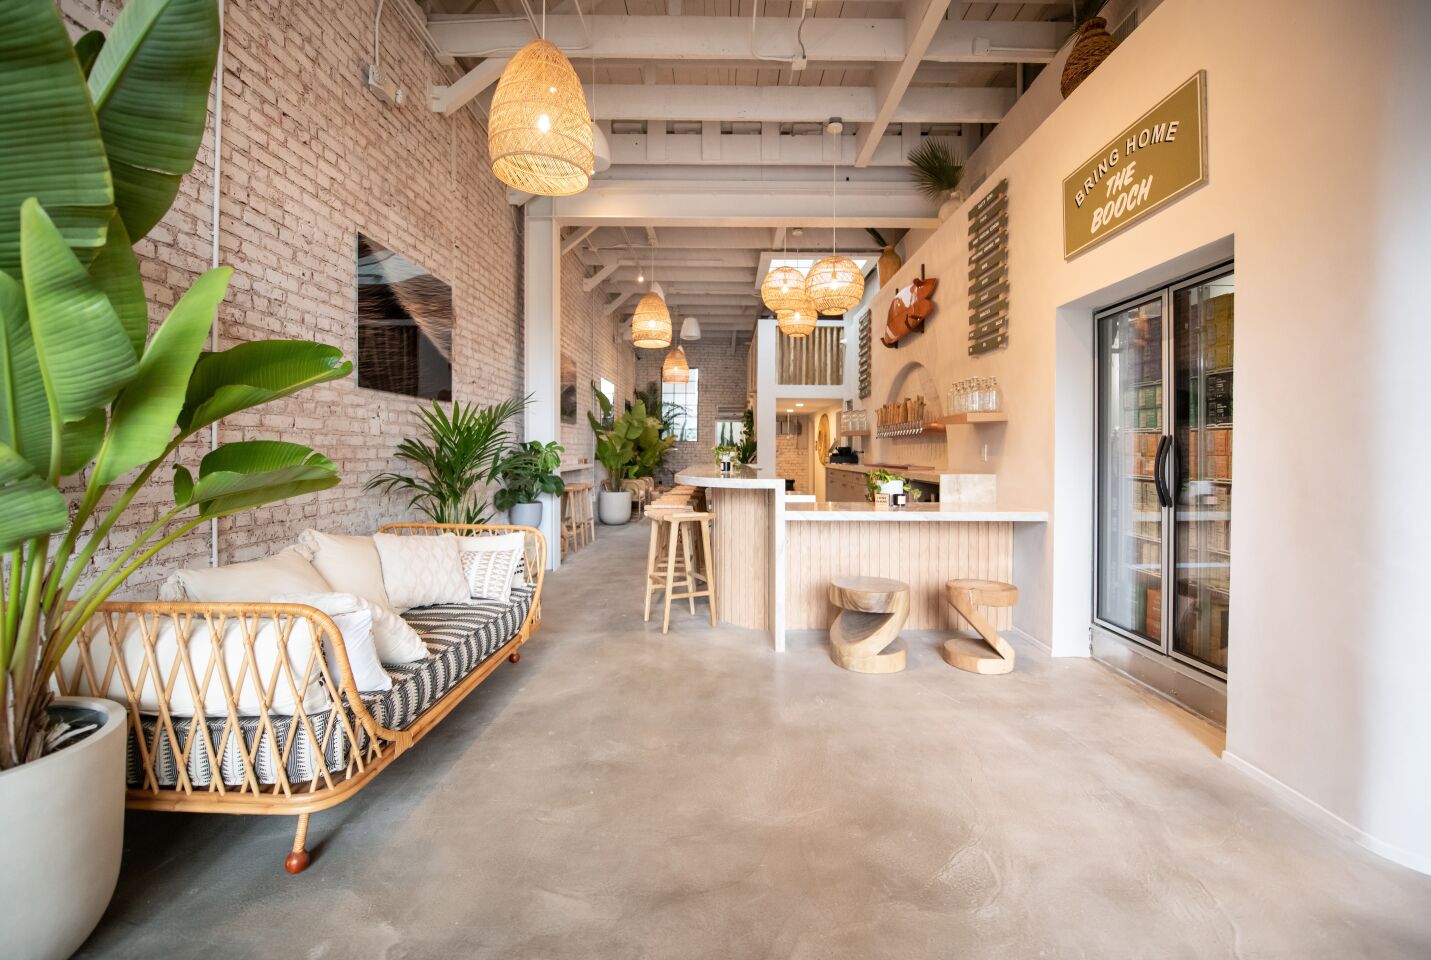 A look inside JuneShine's new Santa Monica location, scheduled to open April 17, 2021.